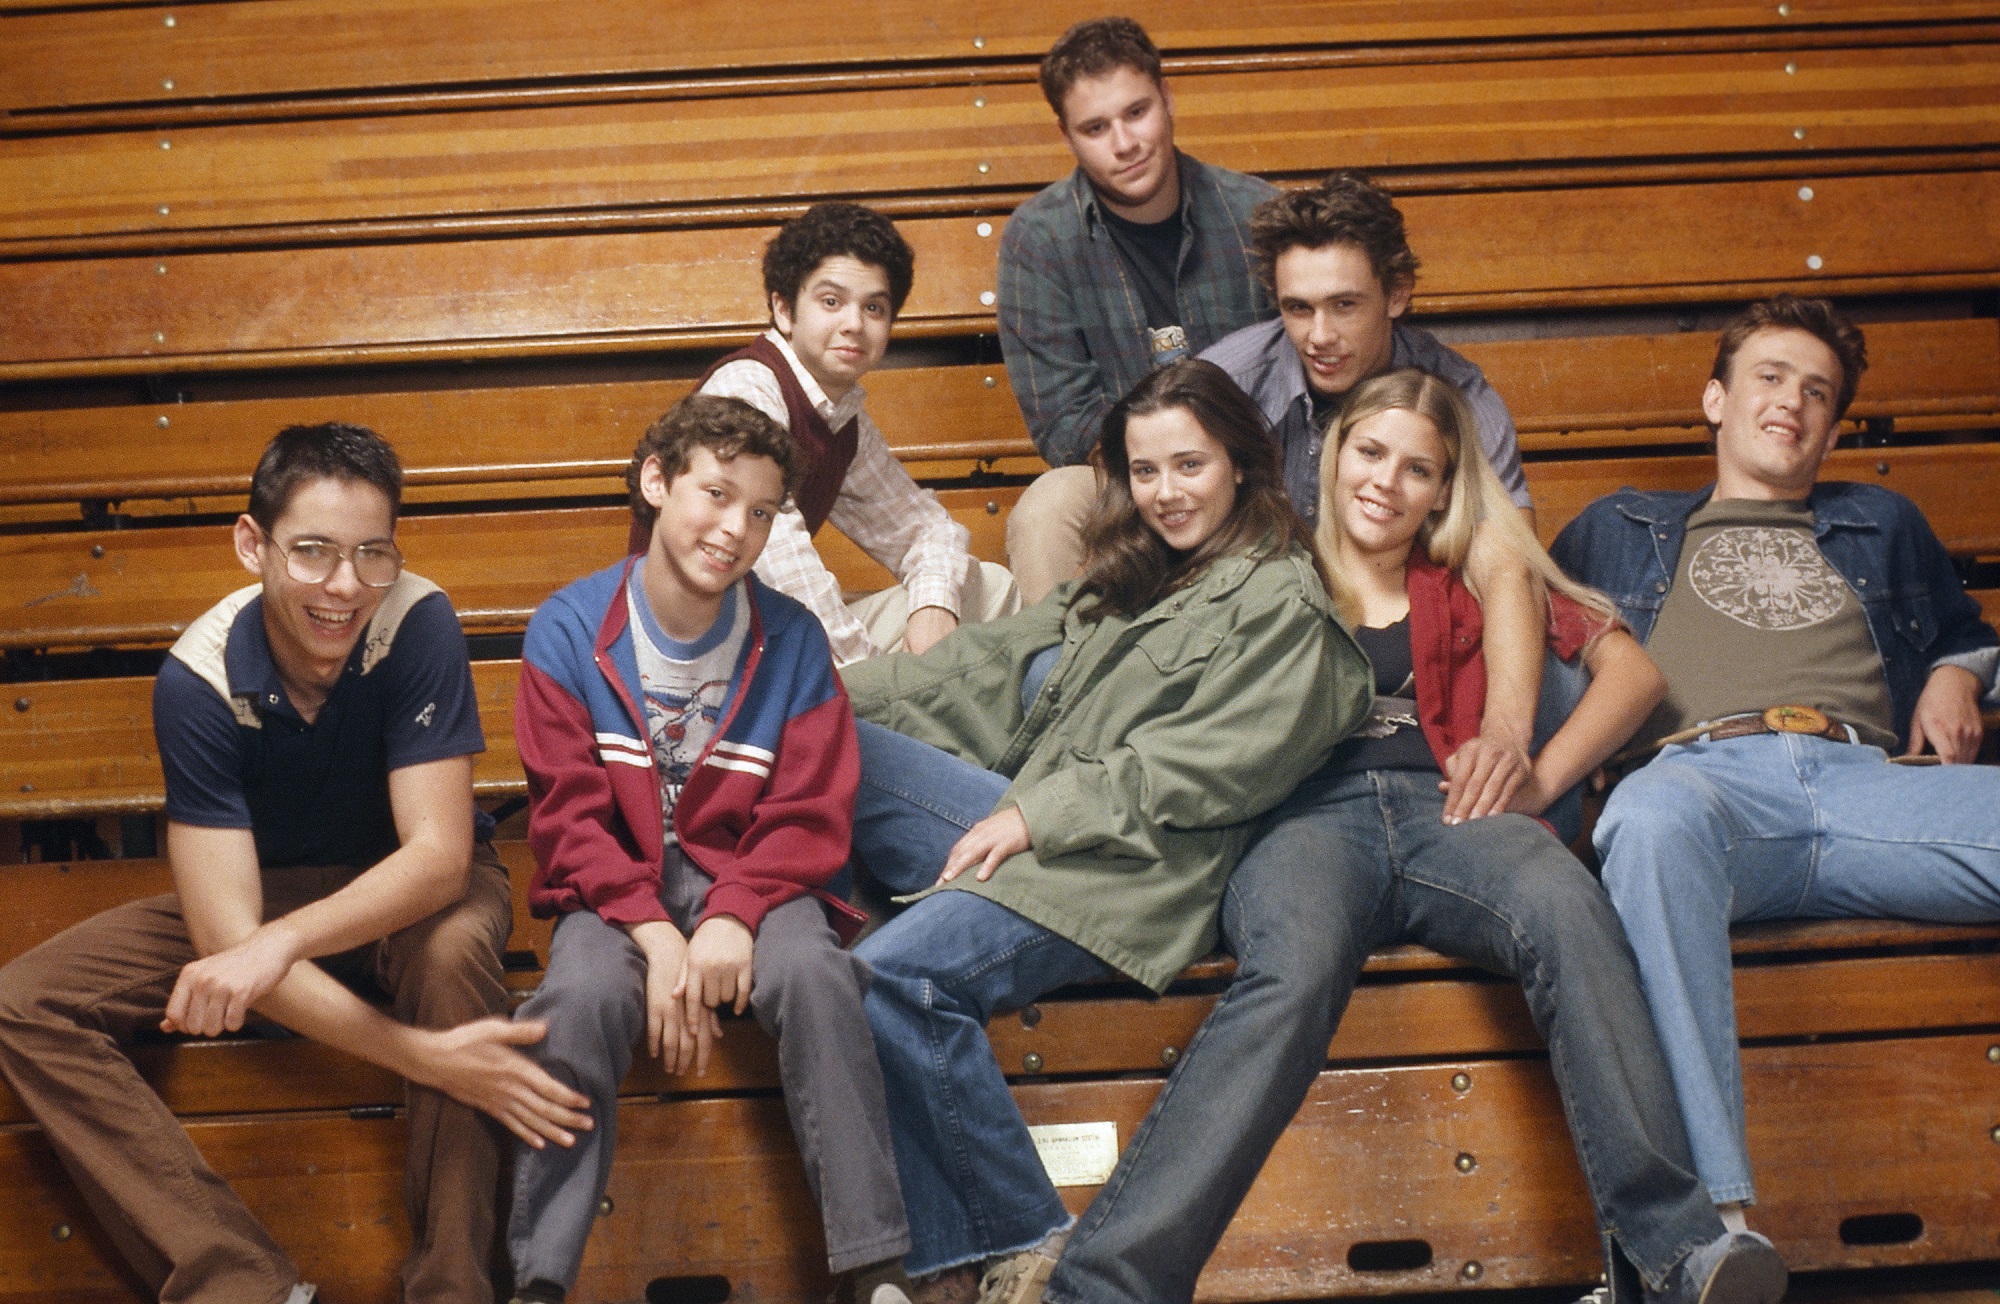 Does The Cast Of Freaks And Geeks Keep In Touch